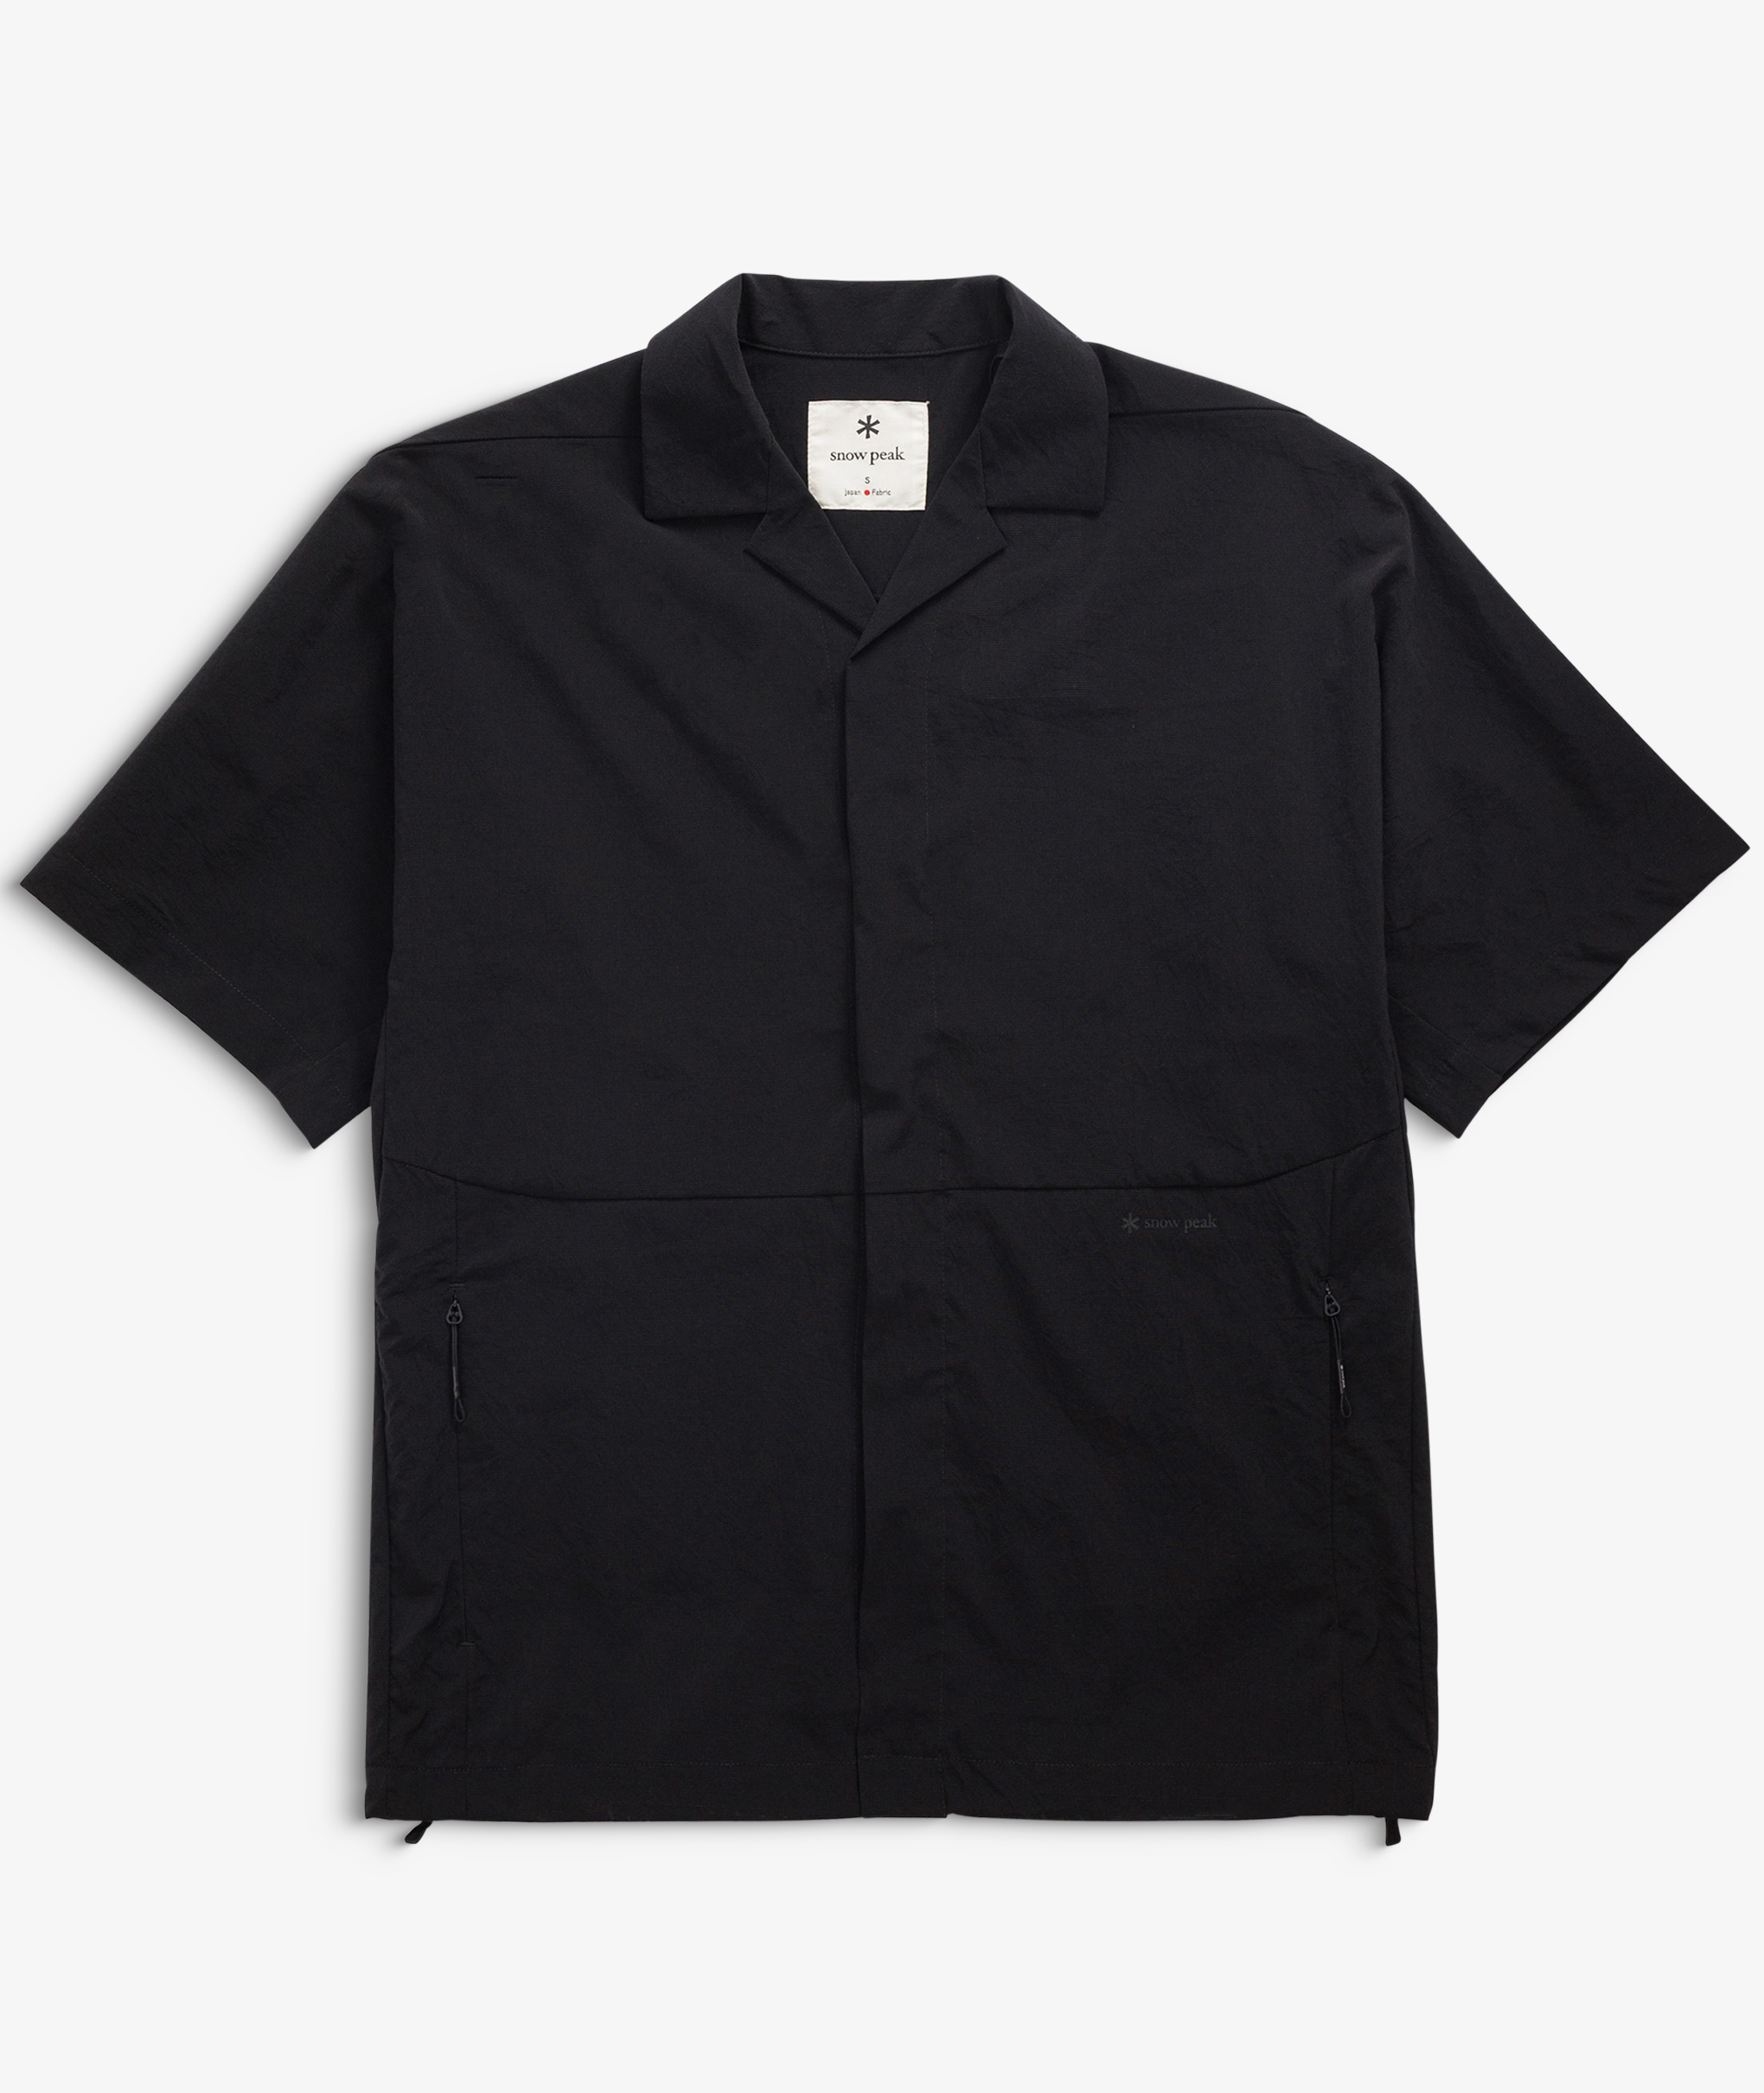 Norse Store | Shipping Worldwide - Snow Peak Breathable Quick Dry Shirt ...